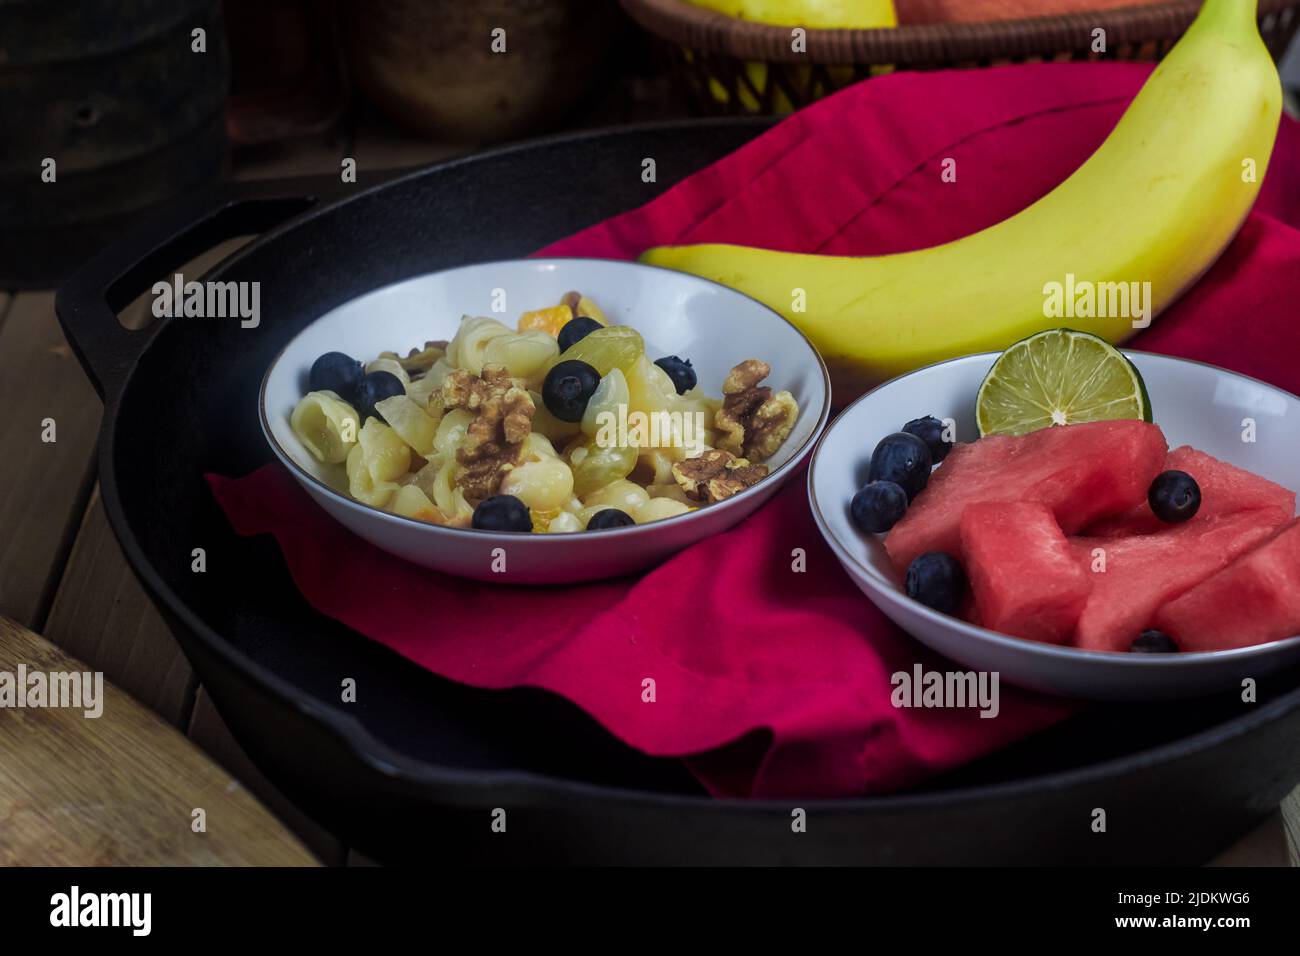 A fruit and nut salad with watermelon chunks, blueberries, a half lime, and a whole banana resting on a red linen napkin in a cast-iron skillet. Stock Photo